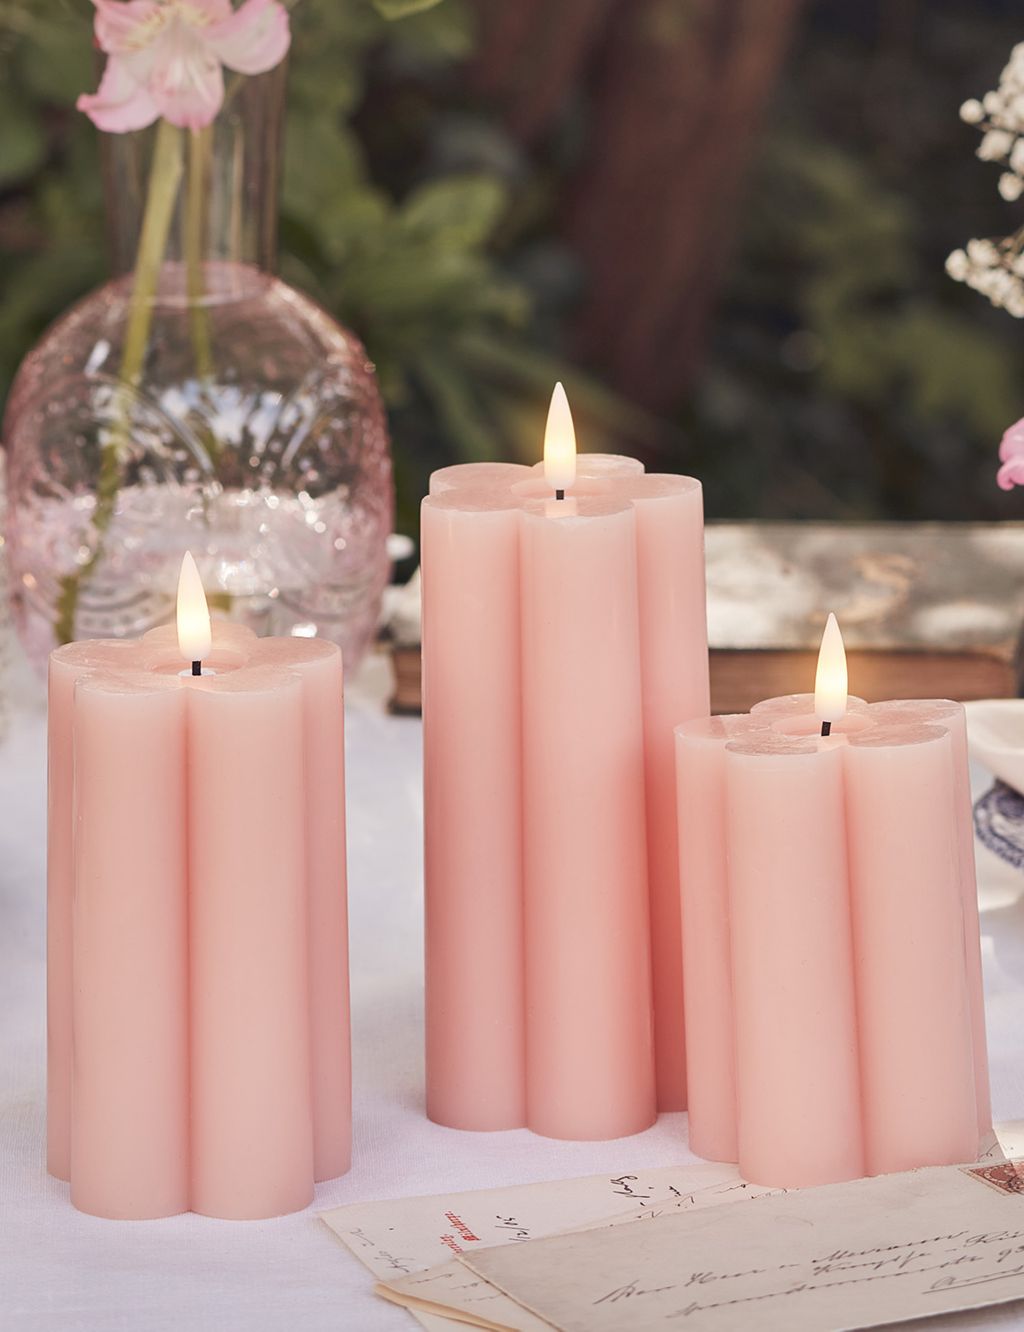 Set of 3 Wax Flower LED Candles